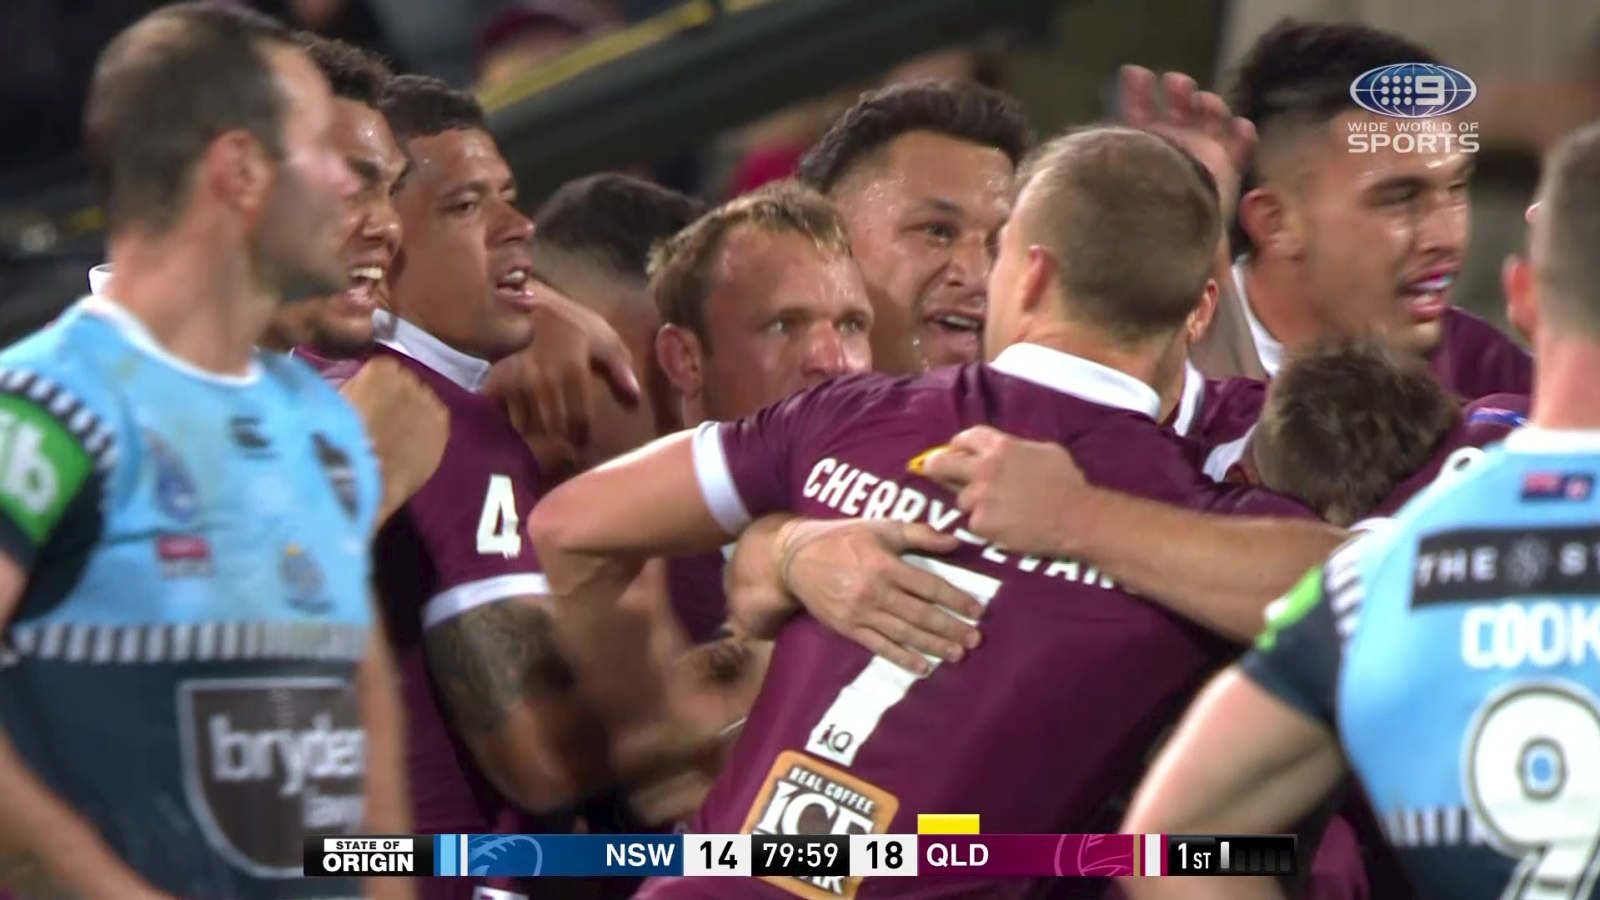 Queensland celebrate the win with a second left on the clock.